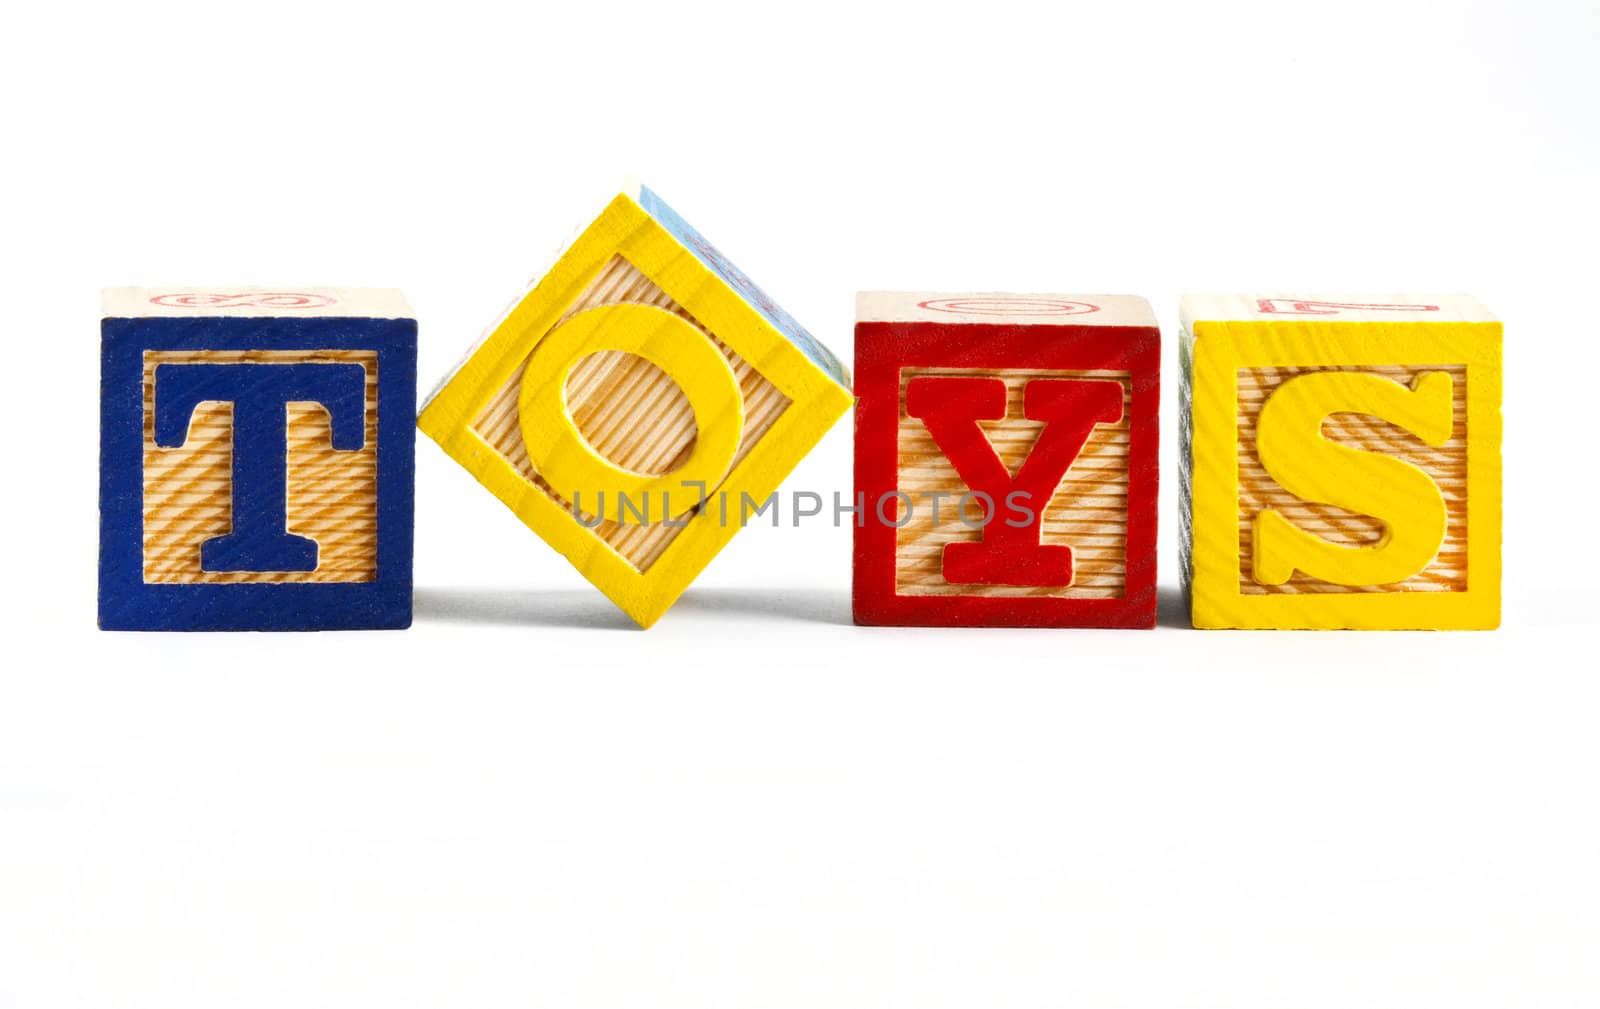 The word 'TOYS' spelt out using letter blocks.